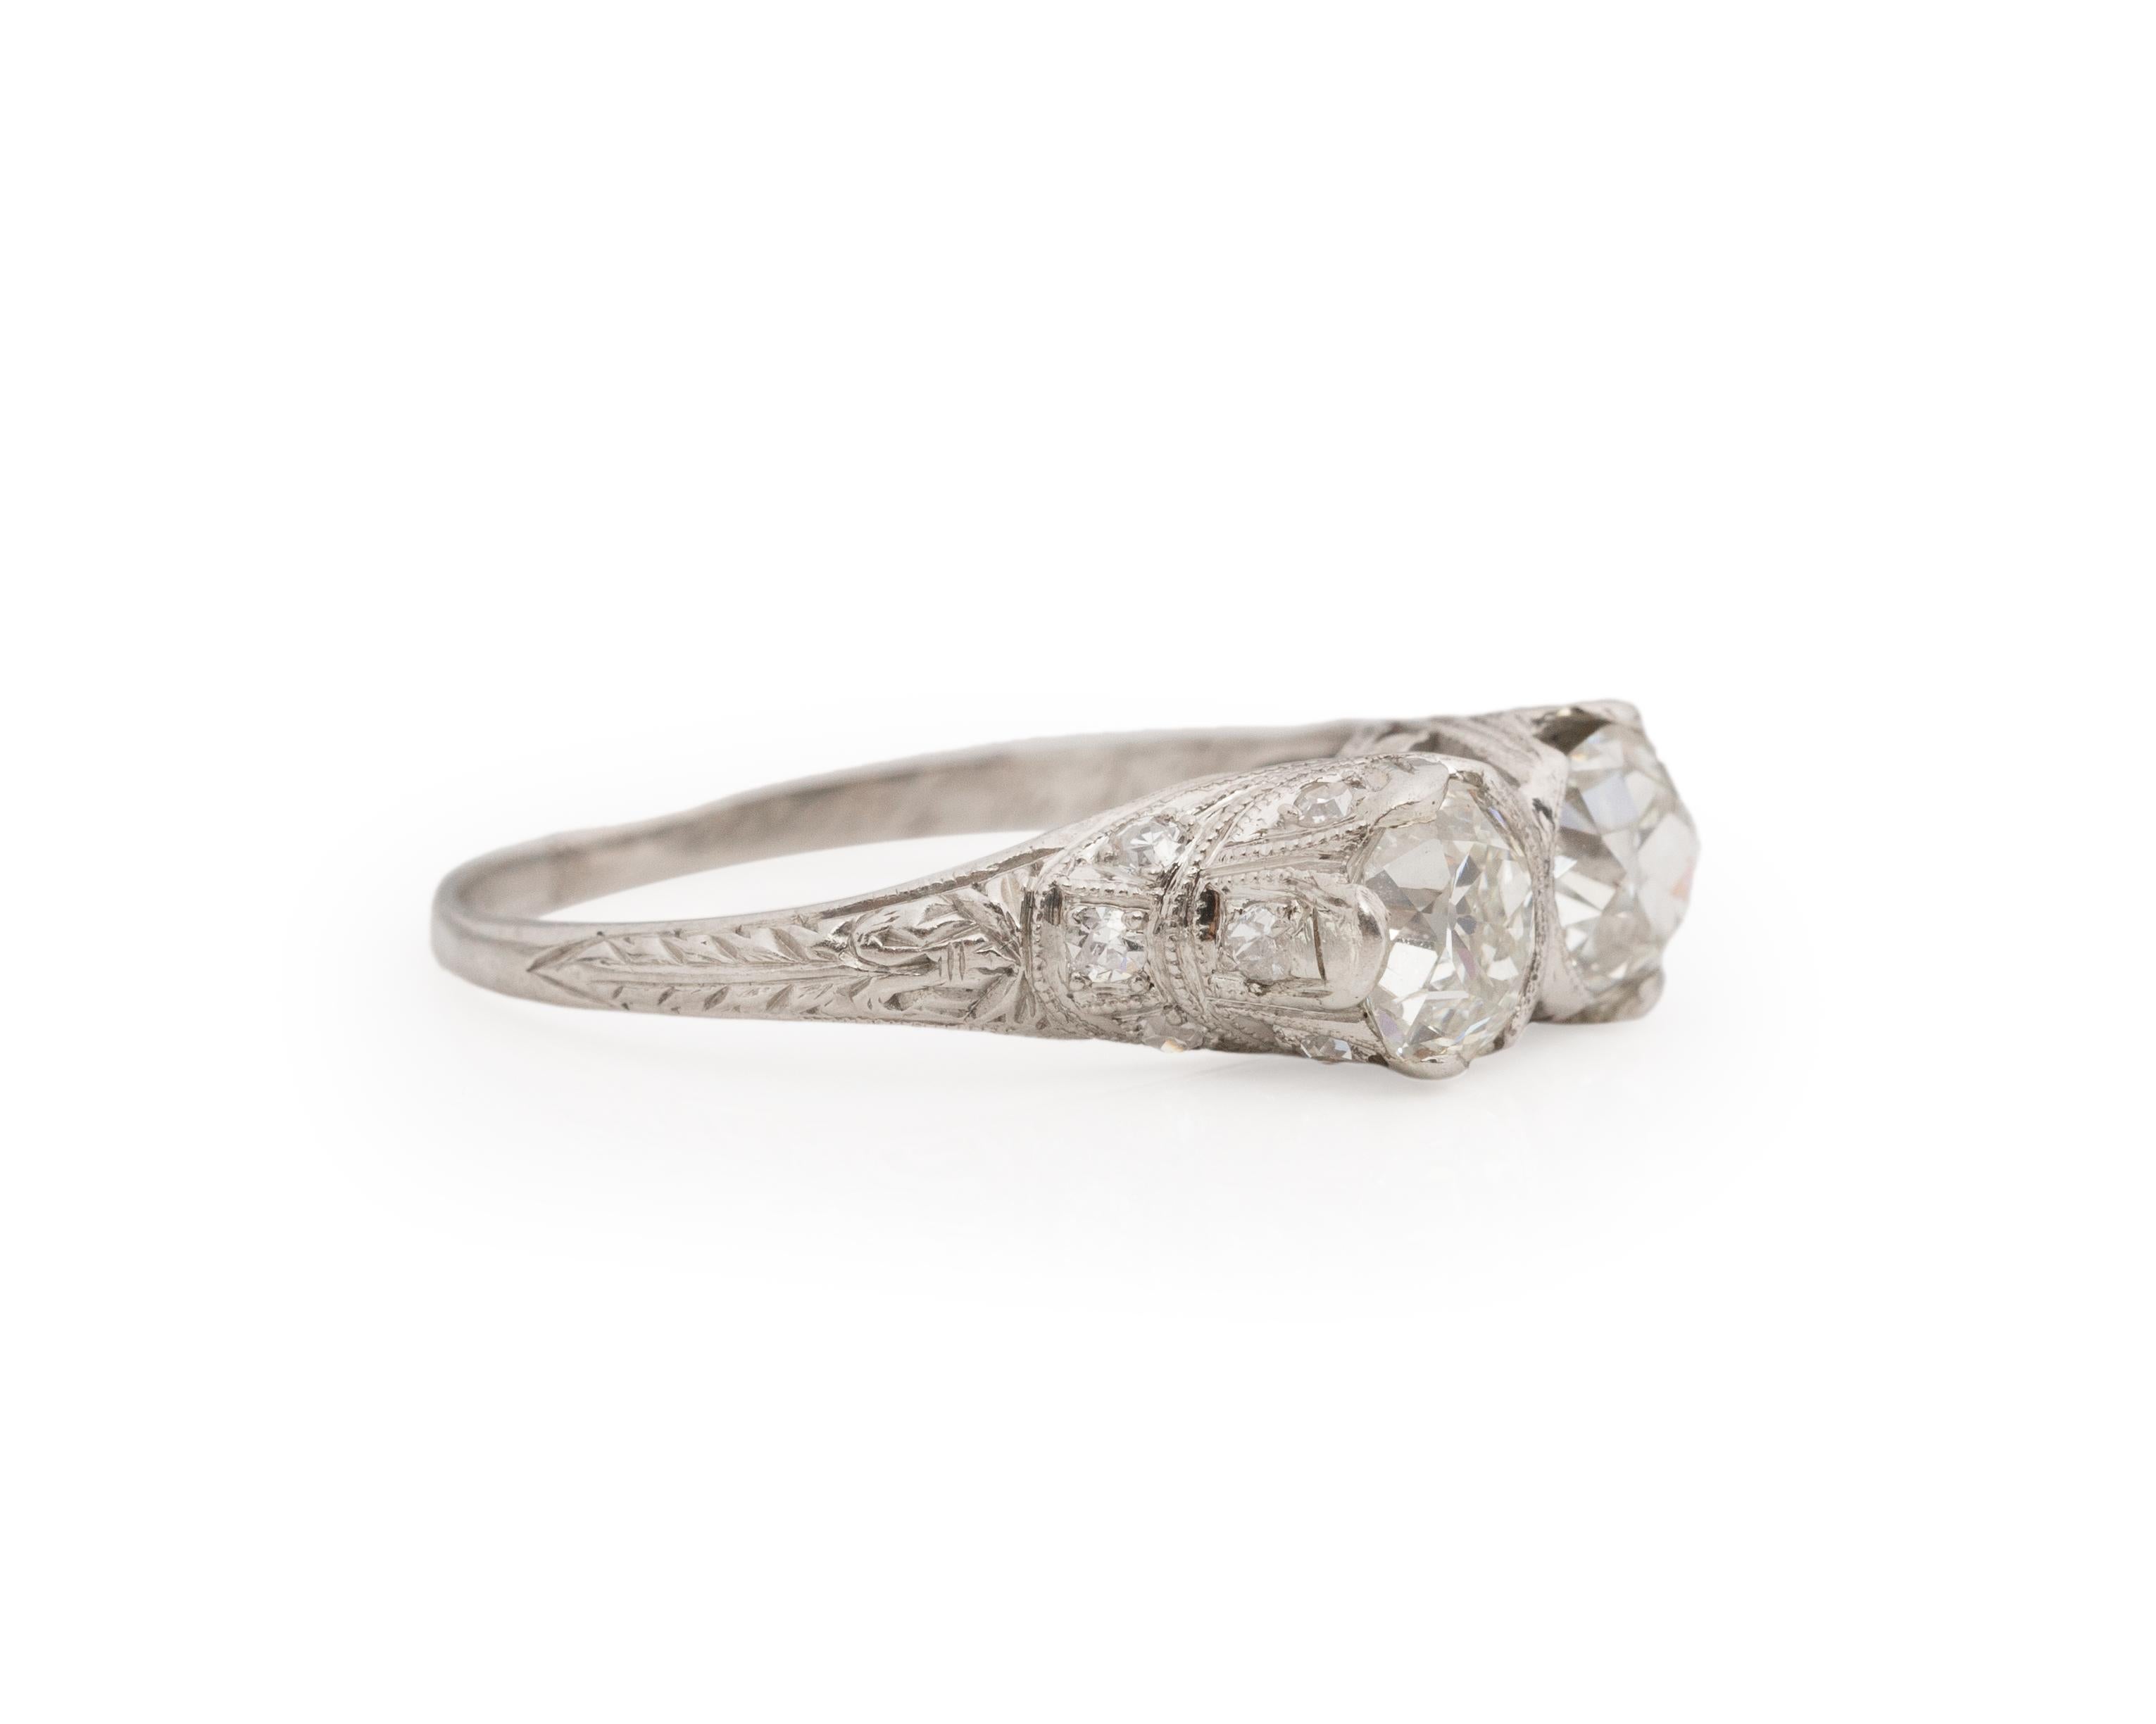 Year: 1920s

Item Details:
Ring Size: 7.75
Metal Type: Platinum [Hallmarked, and Tested]
Weight: 3.6 grams

Main Two Diamond Details:
Weight: 1.80ct total weight, each main stone is .90ct.
Cut: Old Mine Brilliant
Color: H/I
Clarity: VS
Type: